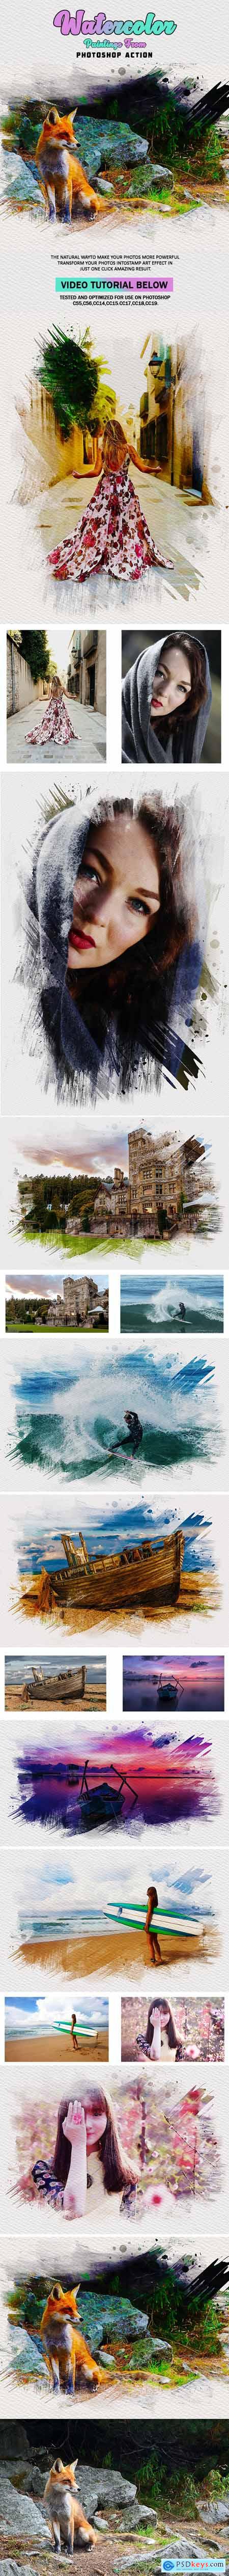 Watercolor Paintings From Photoshop Actions 26086825